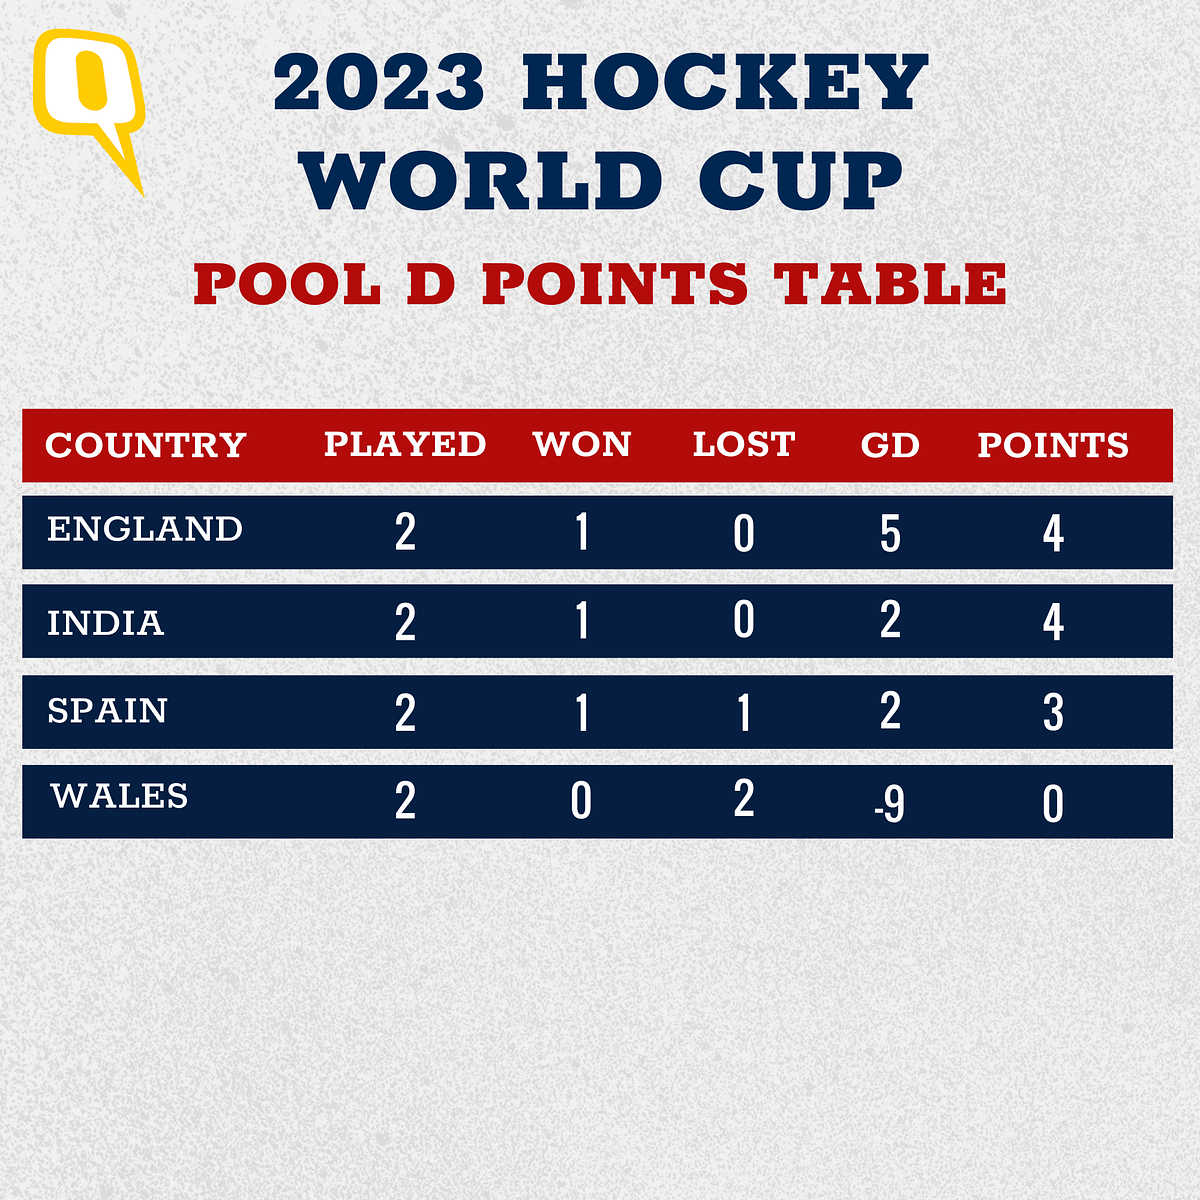 The Indian hockey team remain unbeaten in Pool D of the 2023 Hockey World Cup.